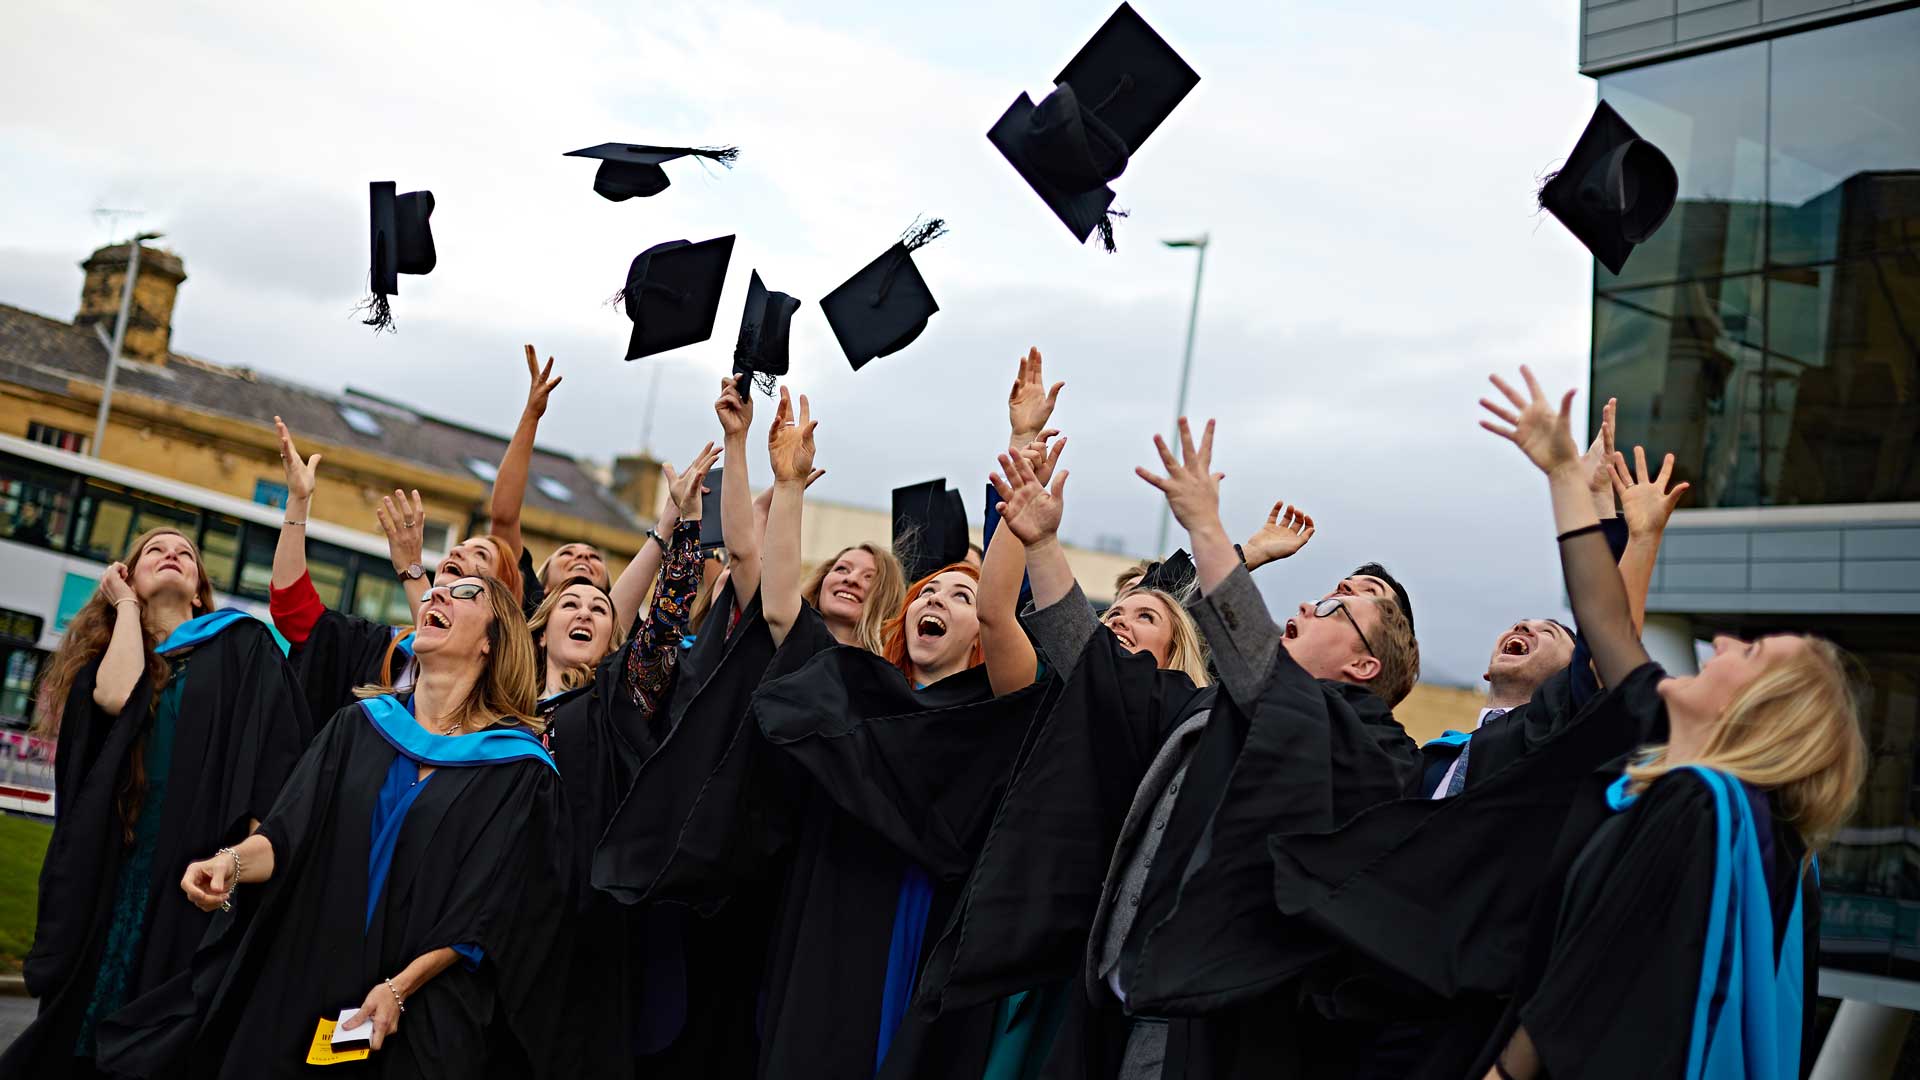 Graduates throwing there mortarboards aloft after a graduation ceremony 